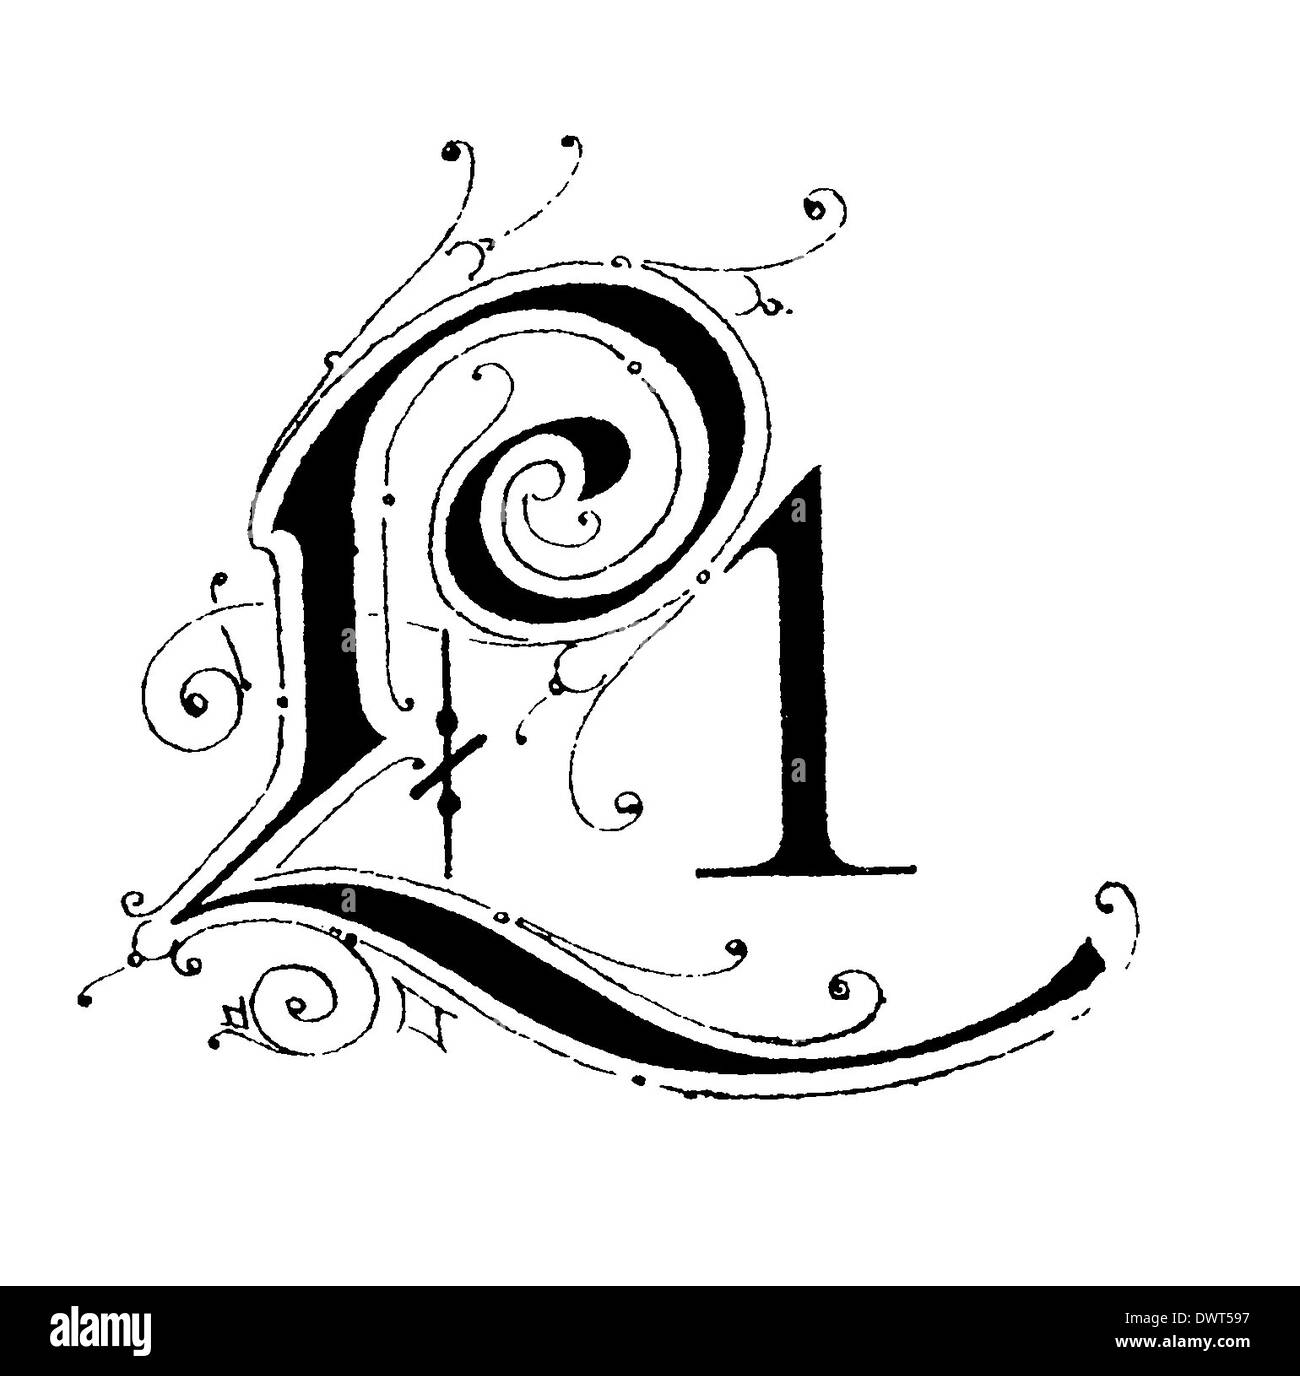 Alphabetic character, letter L Stock Photo